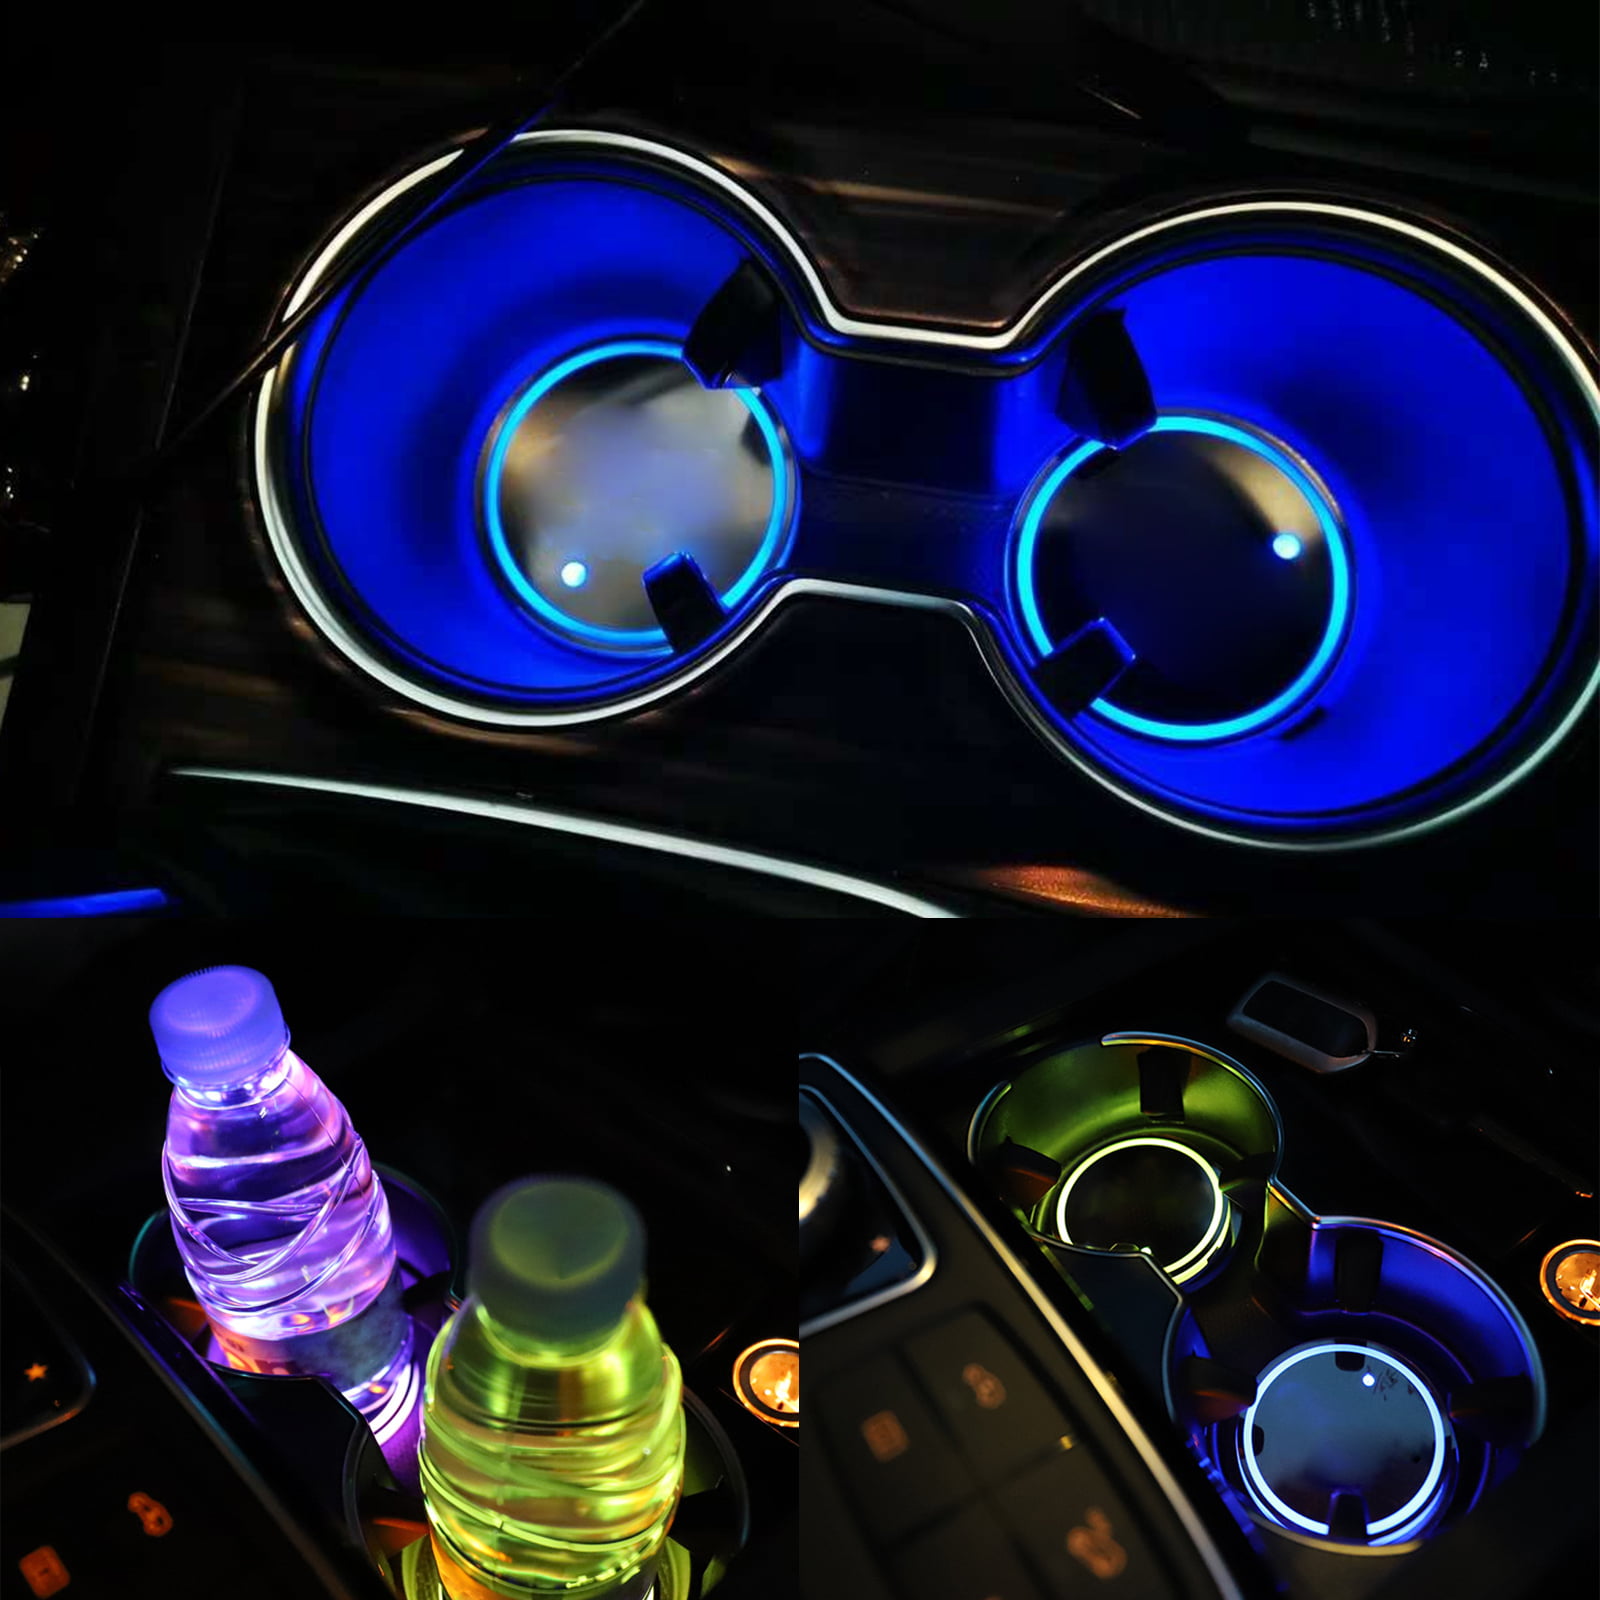 N-i-s-s-a-n- 2pcs LED Car Logo Cup Holder Lights，7 Colors Changing USB Charging Mat Luminescent Cup Pad LED Interior Atmosphere Lamp for All car Logo